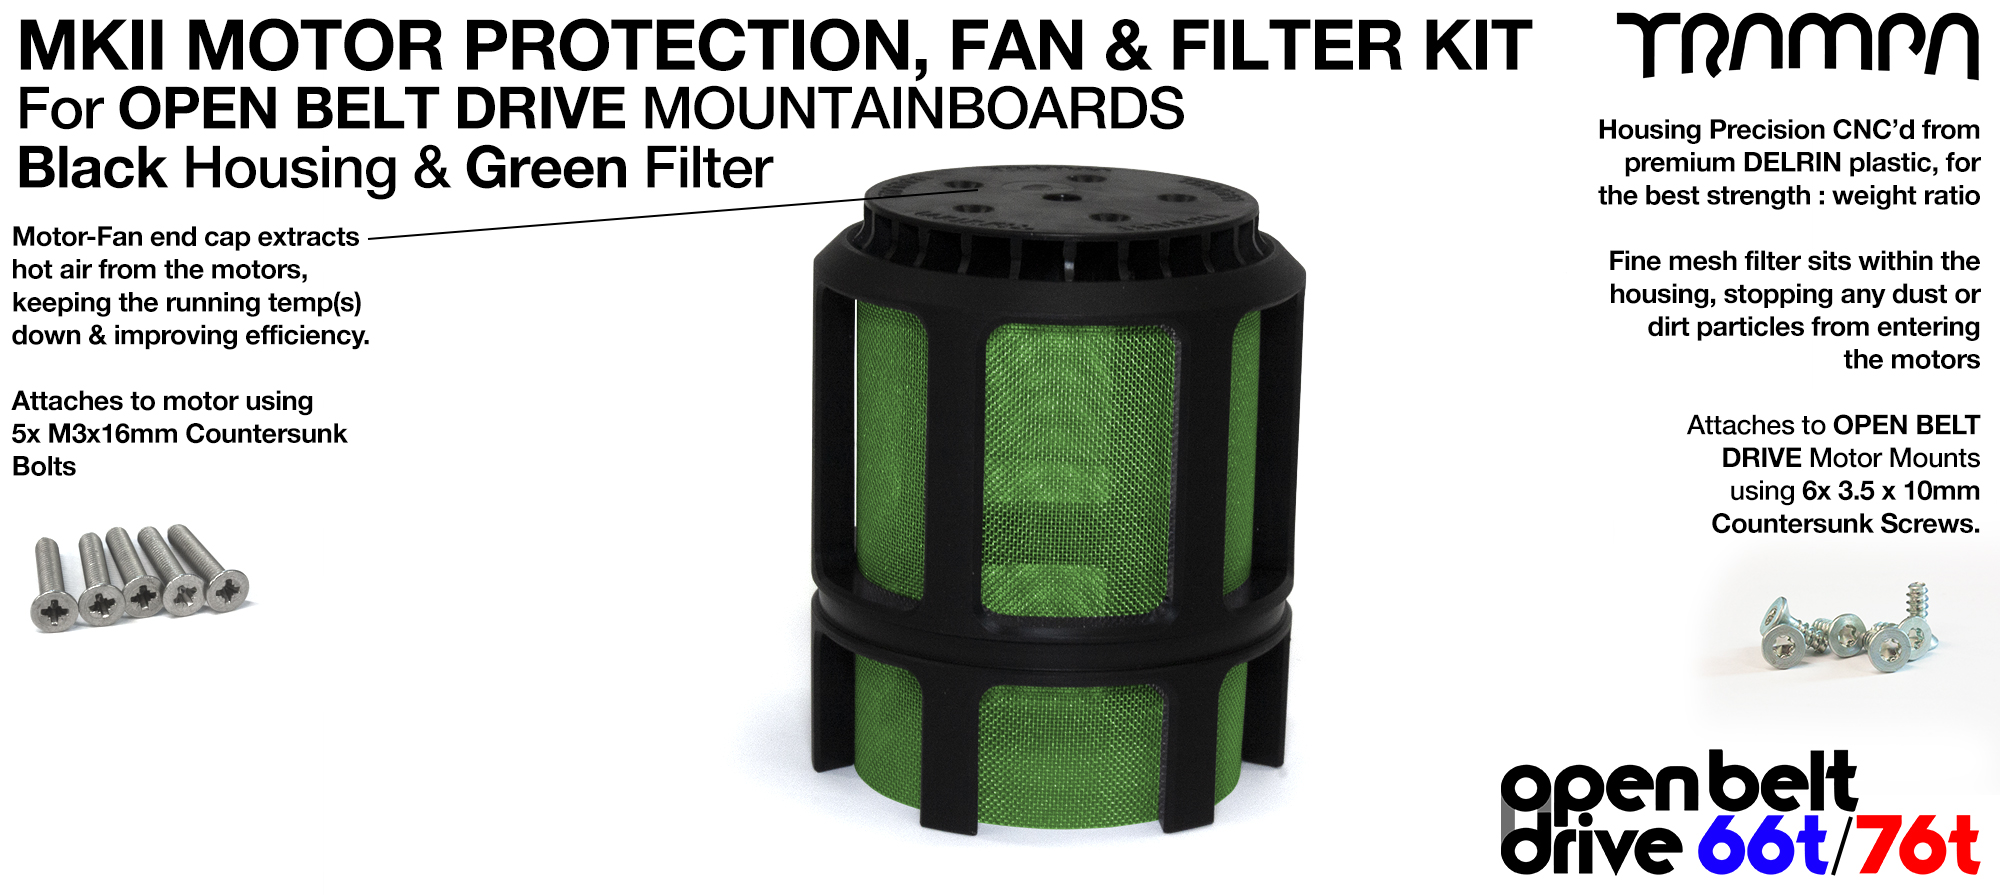 1x OBD MKII Motor protection Sleeve with GREEN Filter